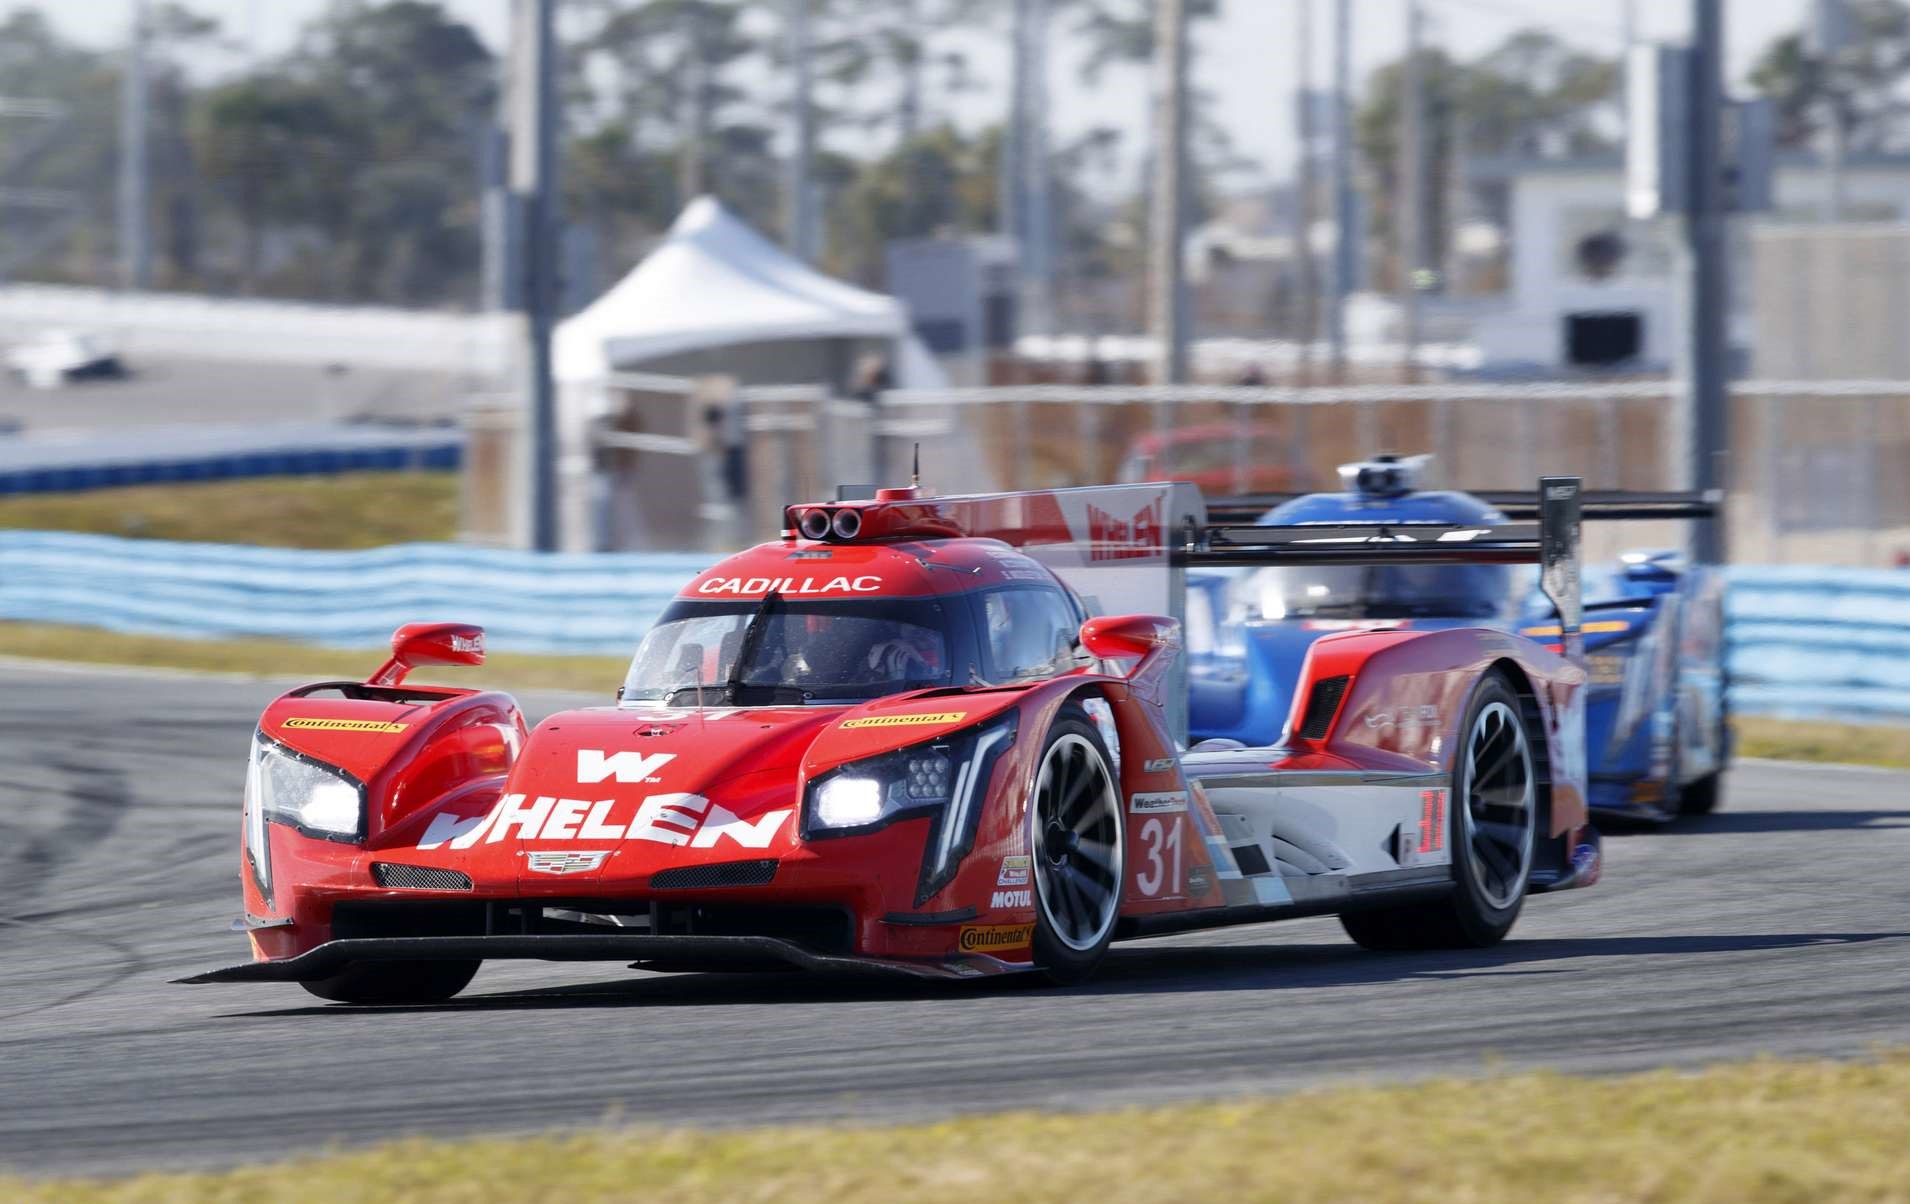 Whelen Cadillac retires from 24 Hours of Daytona due to gearbox issue